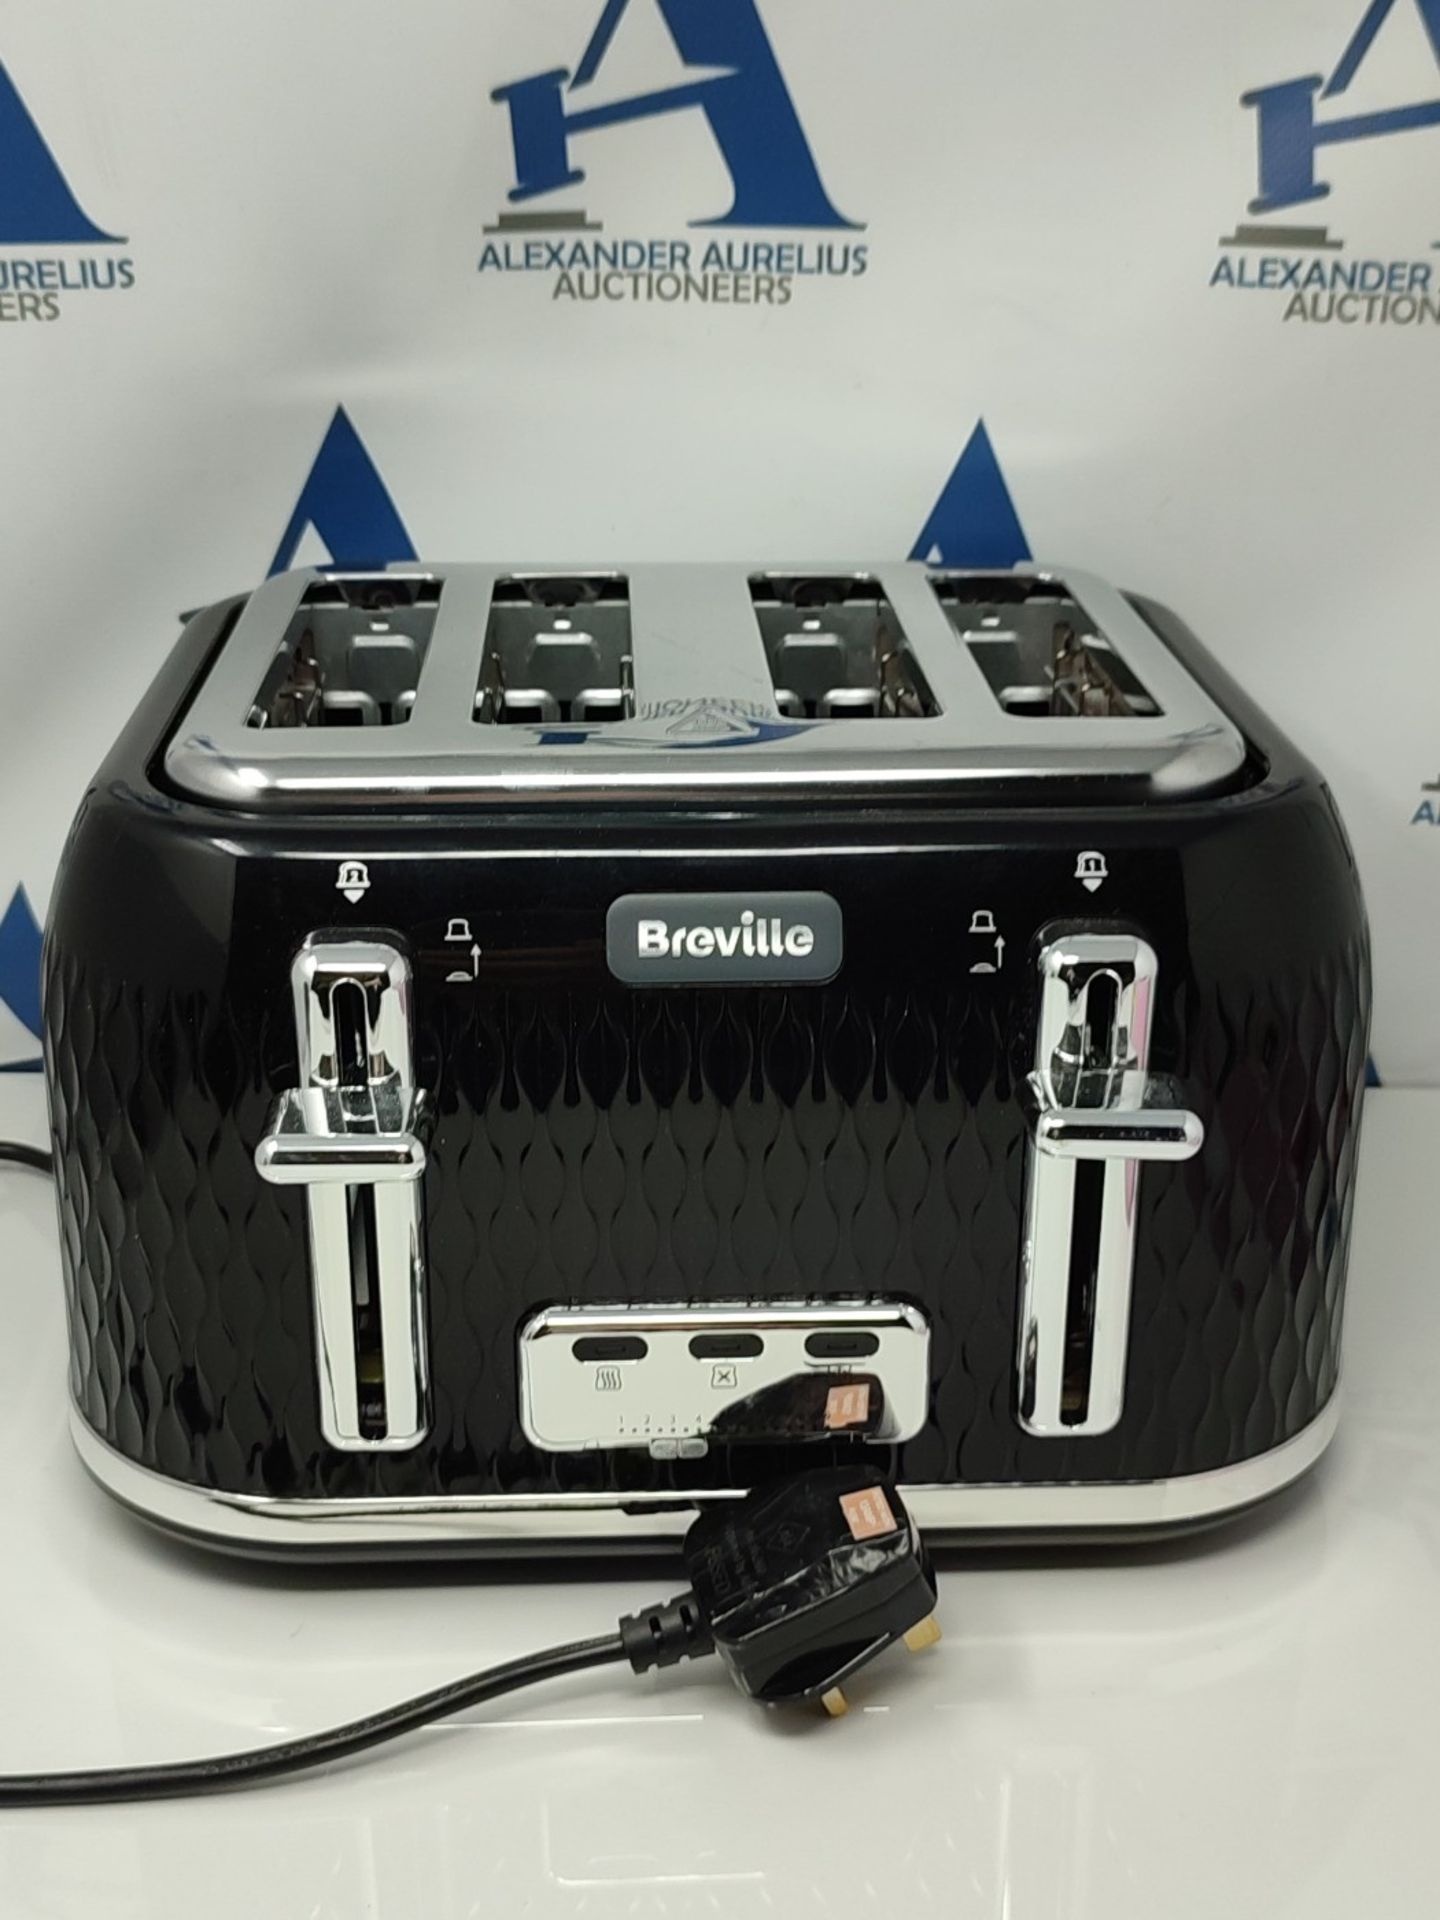 Breville Curve 4-Slice Toaster with High Lift and Wide Slots | Black & Chrome [VTT786] - Image 2 of 2